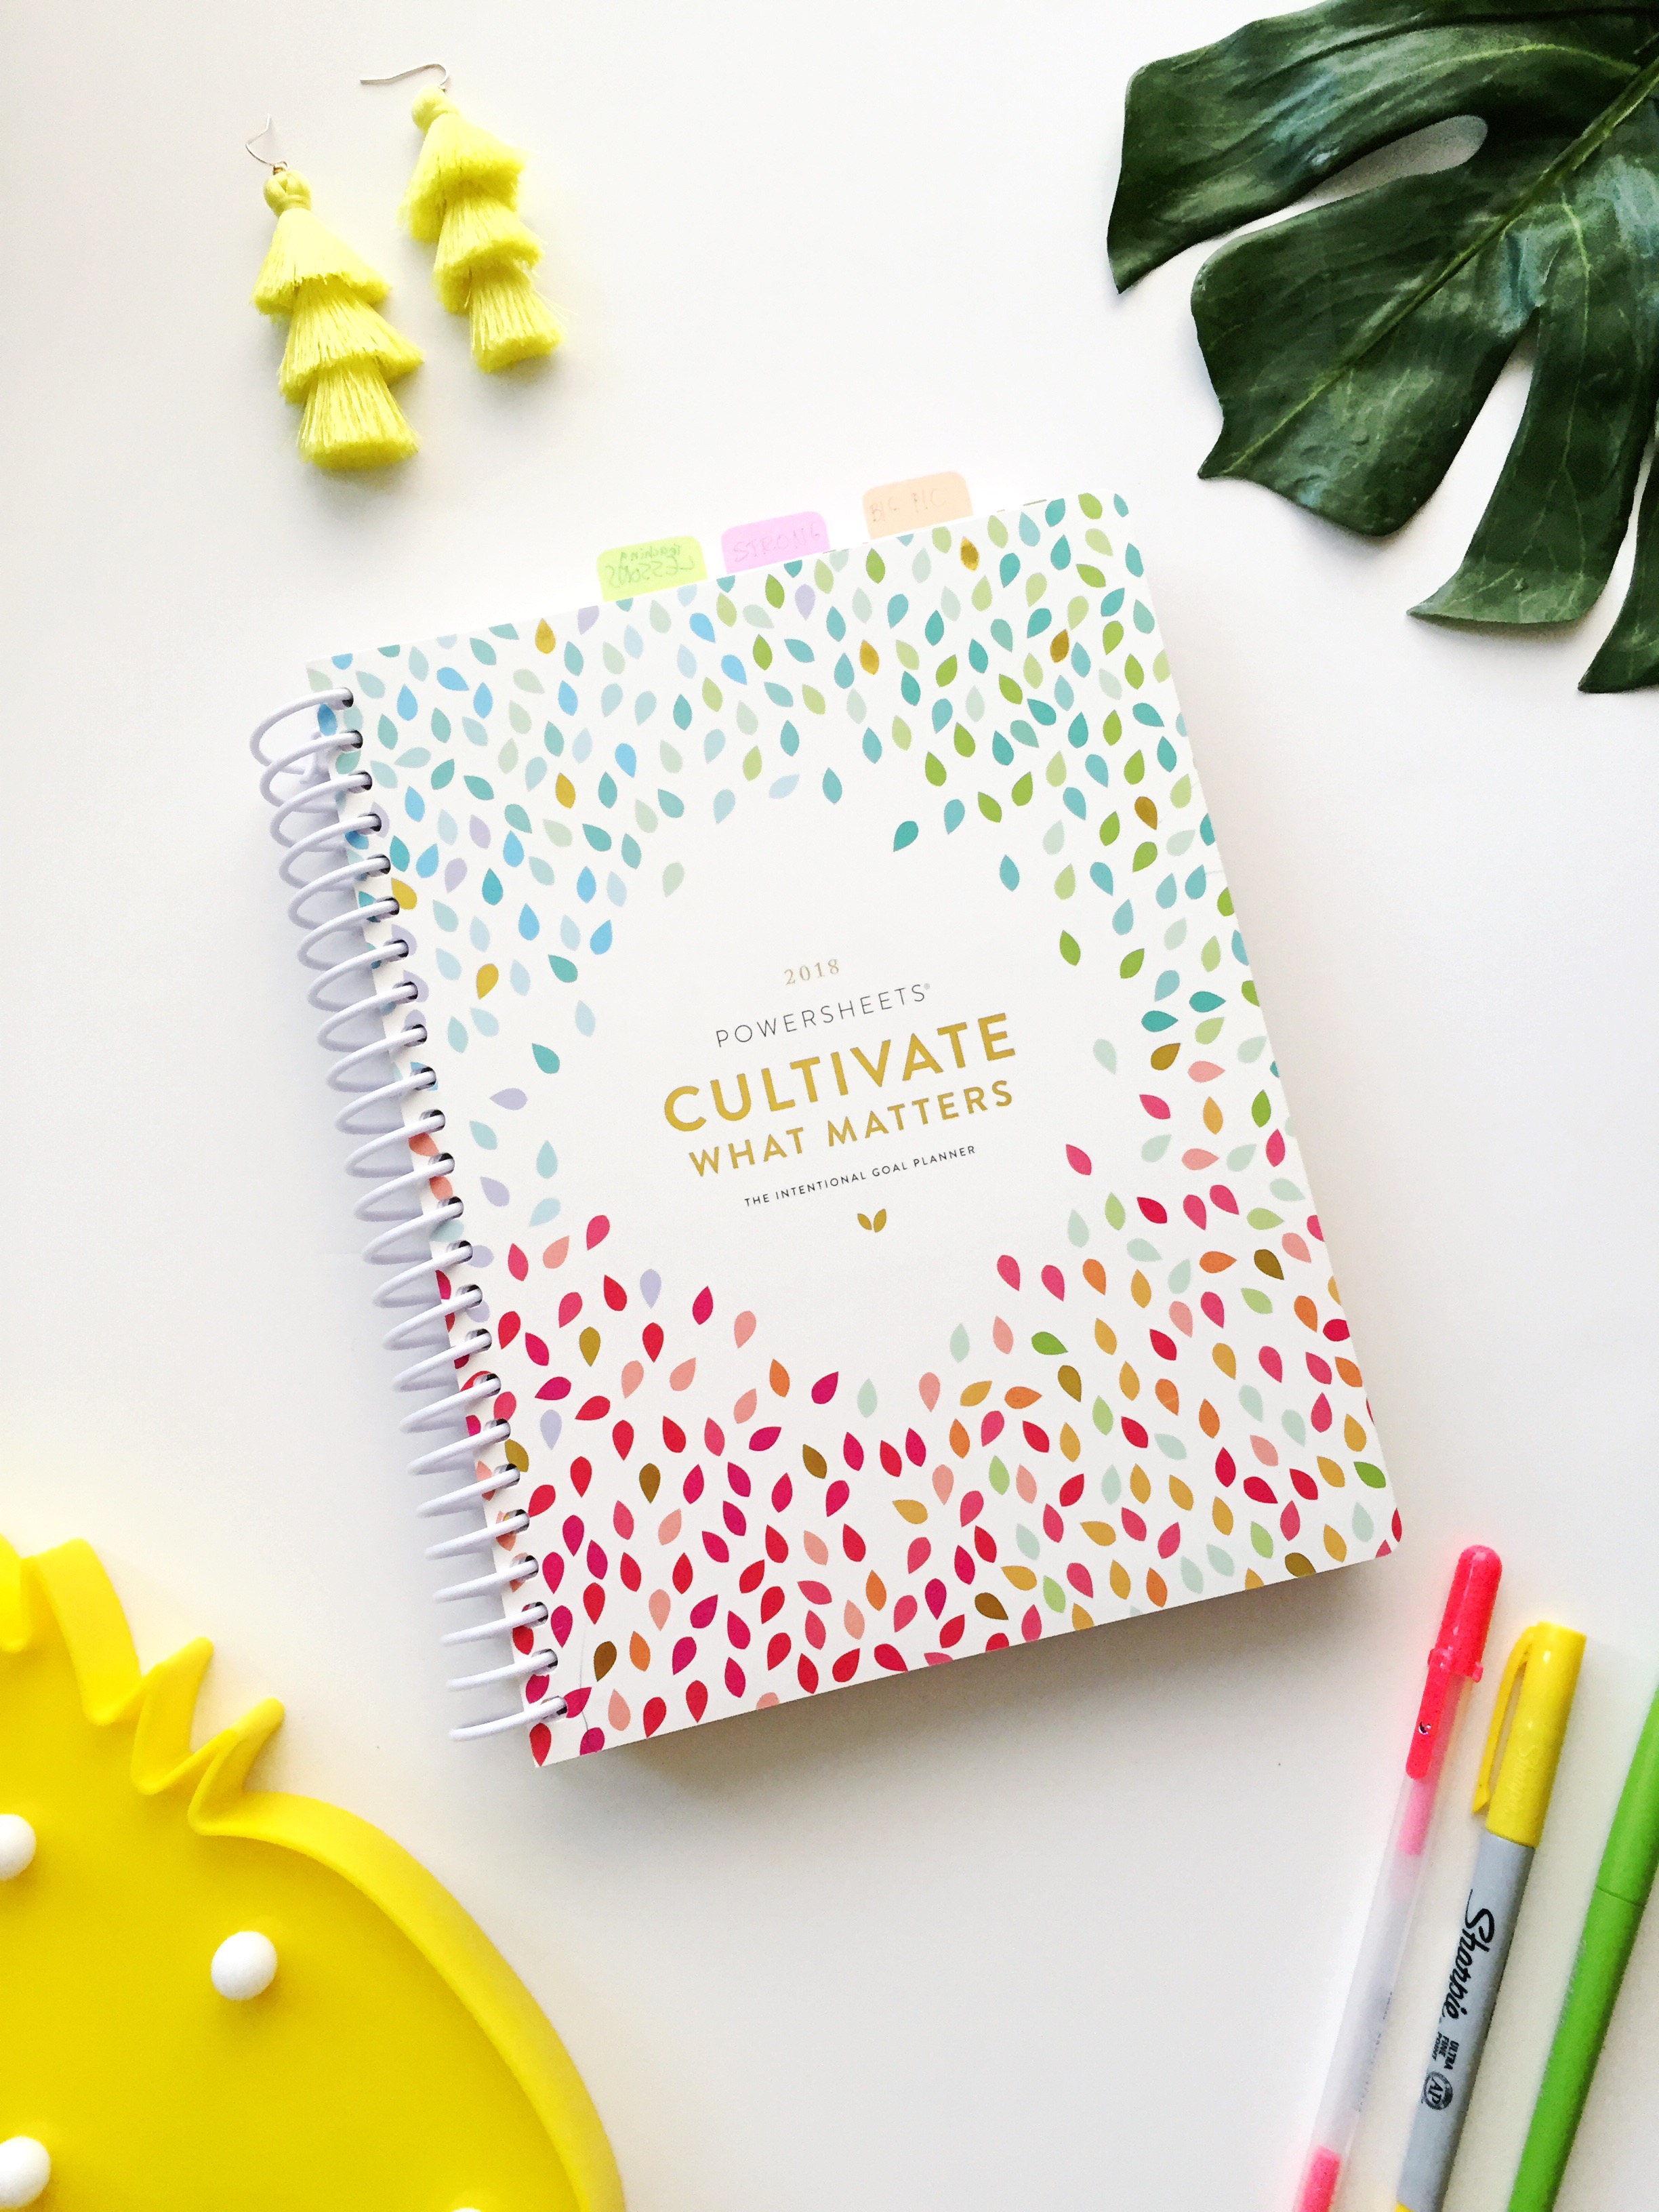 How to Plan Goals / How to Set Goals and Achieve Them / Goal Setting / Powersheets 2019 Intentional Goal Planner / Lara Casey Powersheets / See my 2019 Goals on Sunshine Style, www.thesunshinestyle.com